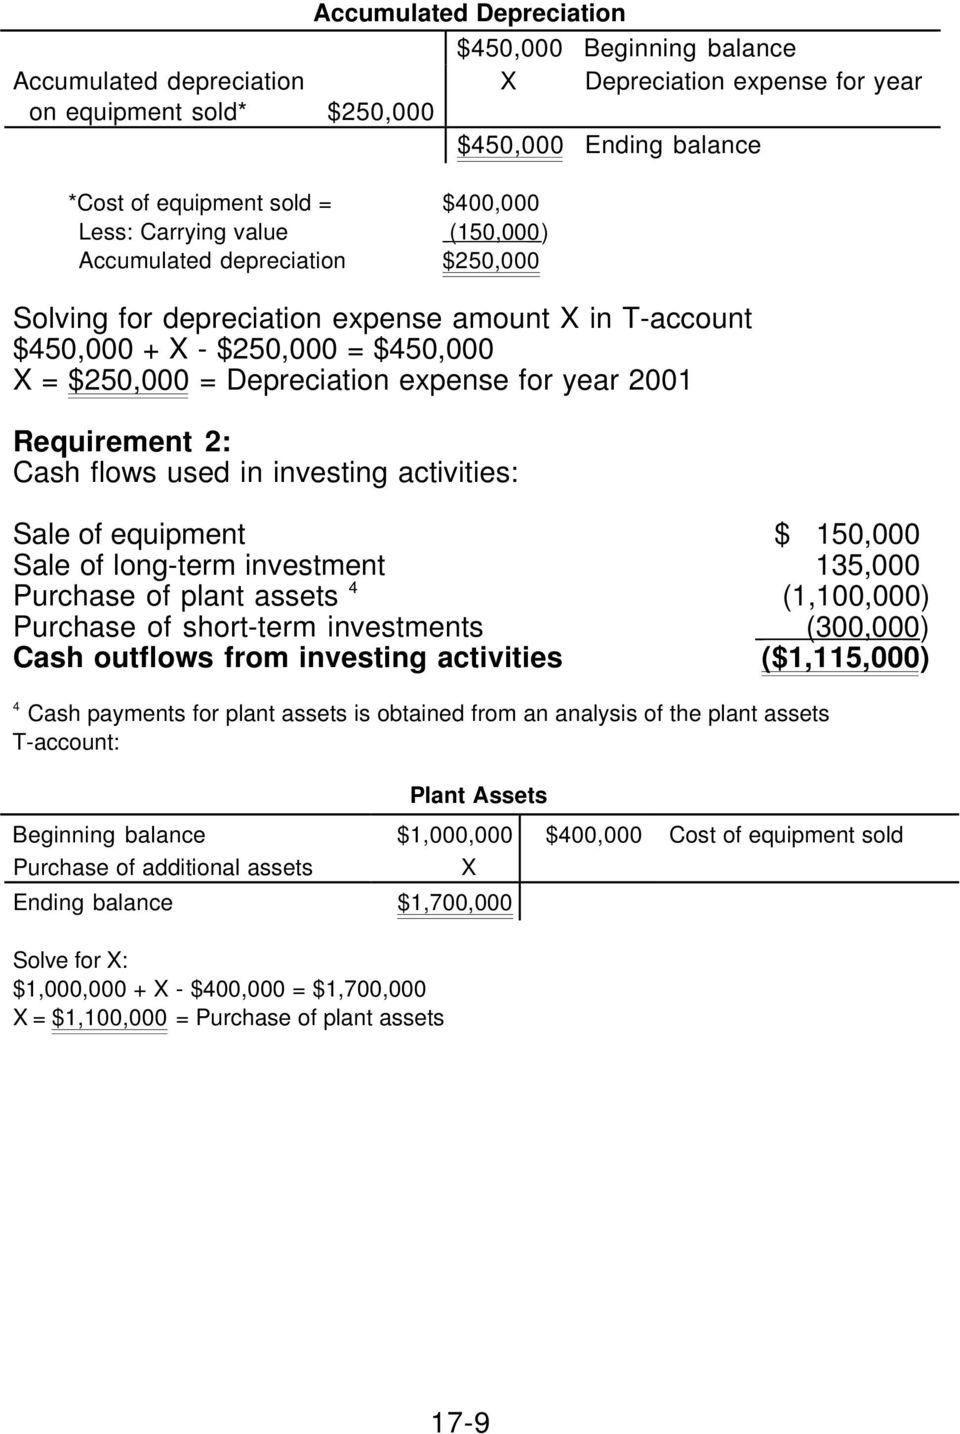 2001 Requirement 2: Cash flows used in investing activities: Sale of equipment $ 150,000 Sale of long-term investment 135,000 Purchase of plant assets 4 (1,100,000) Purchase of short-term investments